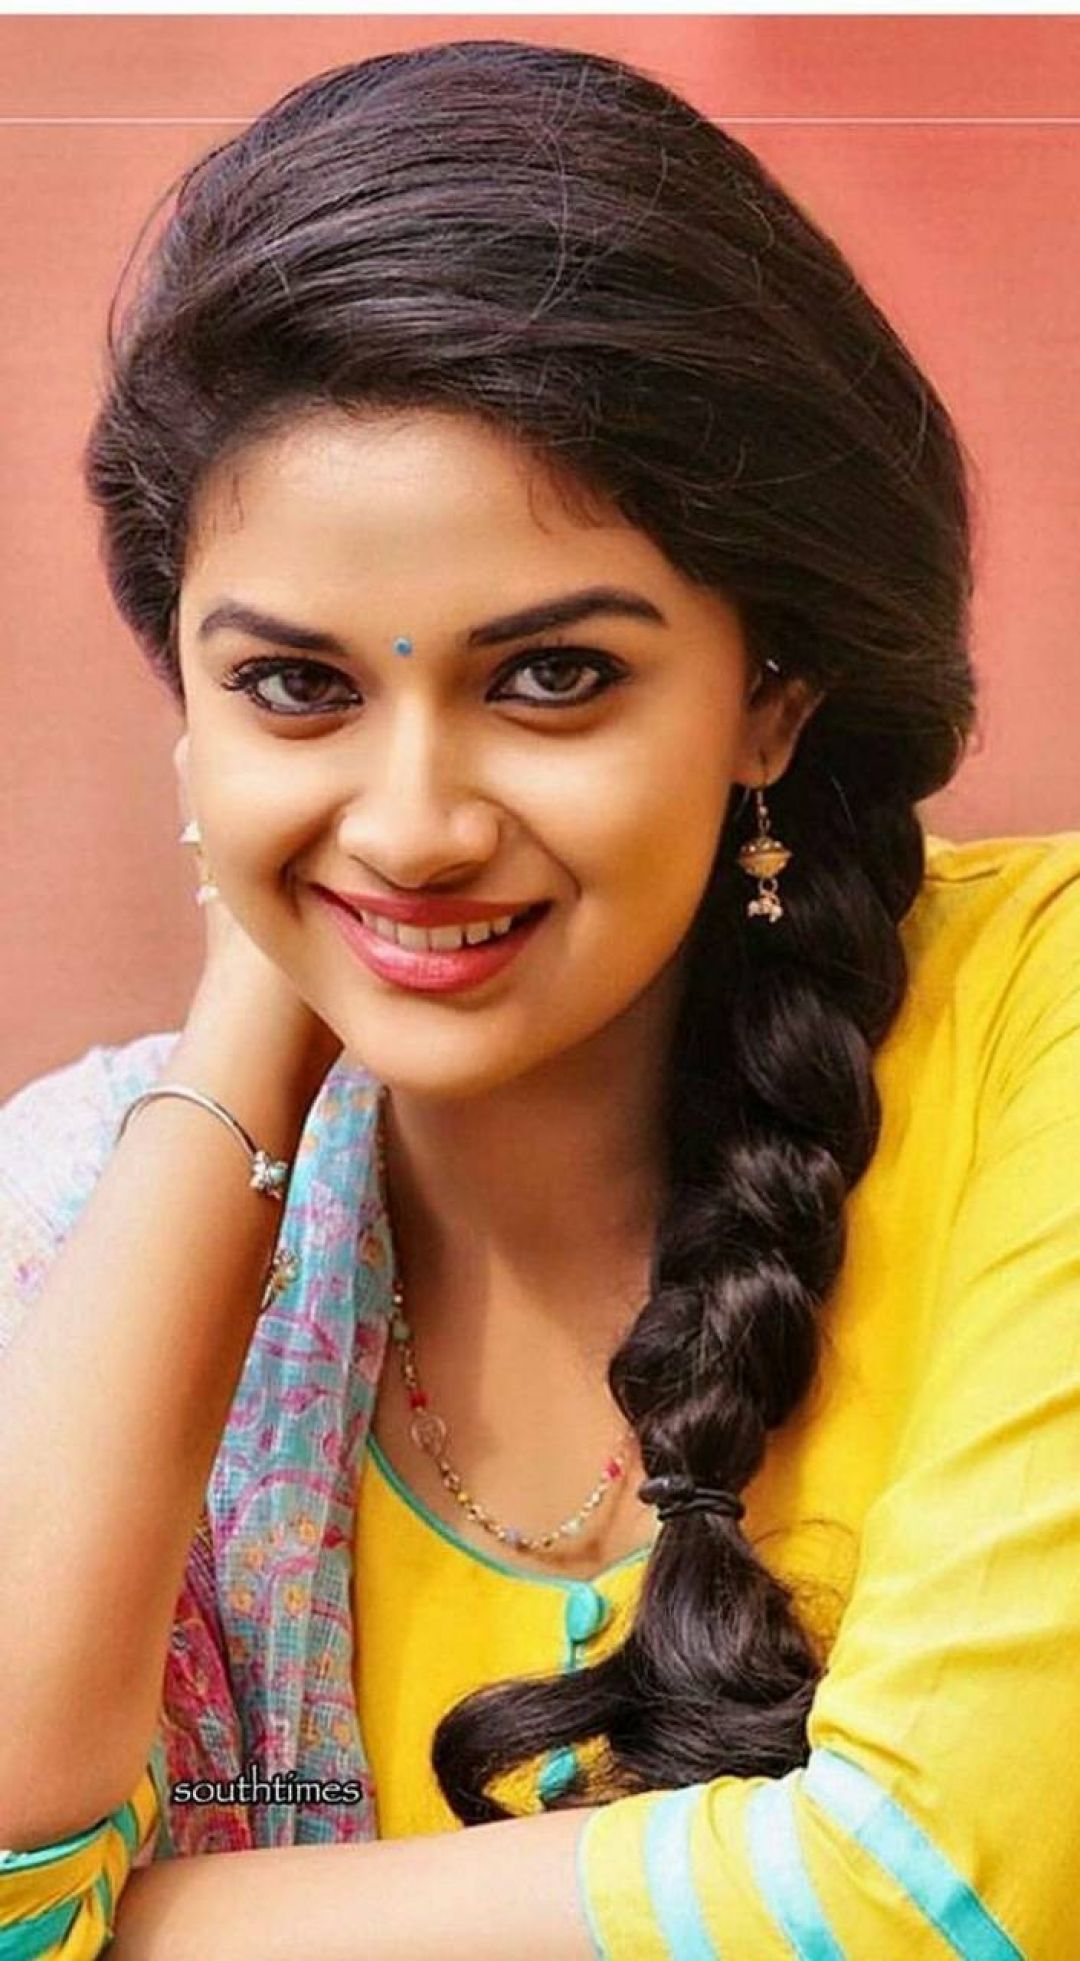 Keerthy Suresh Photos Hd 3218139 Hd Wallpaper Backgrounds Download Keerthi suresh wallpapers hd 2019 app is to not only setting keerthi suresh photos as wallpapers but also share & save selected favorite image. keerthy suresh photos hd 3218139